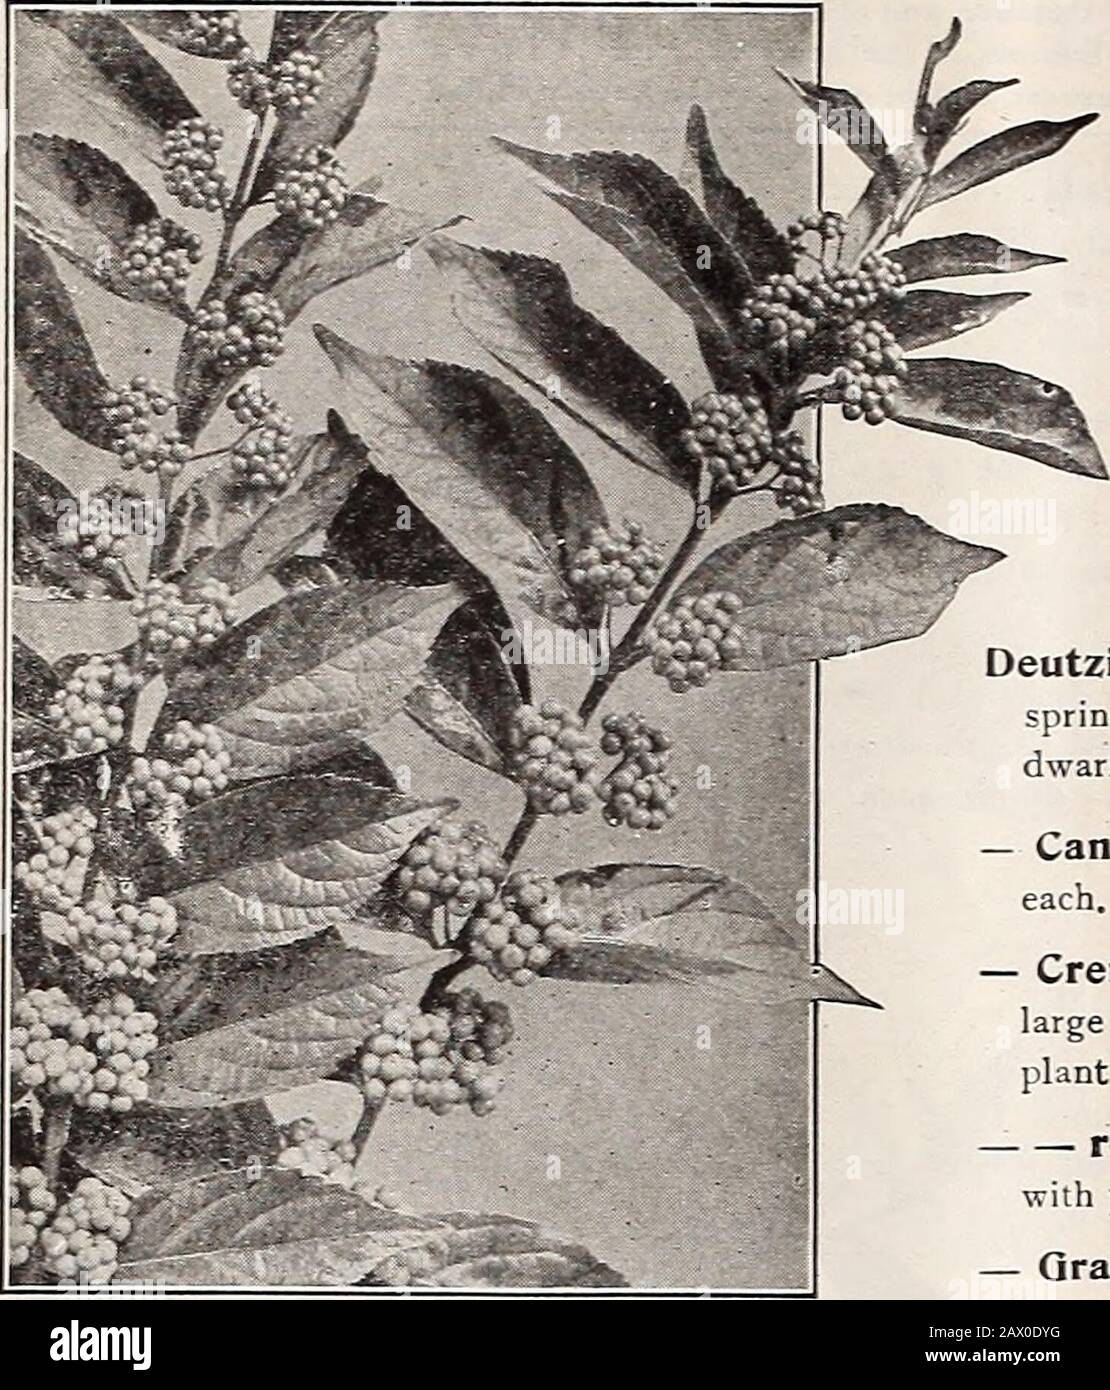 Dreer's autumn catalogue 1920 . Cotoneaster Morizontalis. A dwarf trailing evergreenShrub, which during autumn and winter is covered with bril-liant red berries. Fine for rockeries or the edge of the border.75 cts. each. — Francheti. Of graceful habit, with long arched branches,large light green leaves and attractive orange-yellow berries.75 cts. each. Cytisus Laburnum {Golden Chain, or Oolden Rain)-A dwarf tree or large Shrub with shining green leaves andlong, drooping racemes of yellow flowers which appear inearly summer. 75 cts, each. Deutzias. Well-known profuse flowering Shrubs, blooming Stock Photo